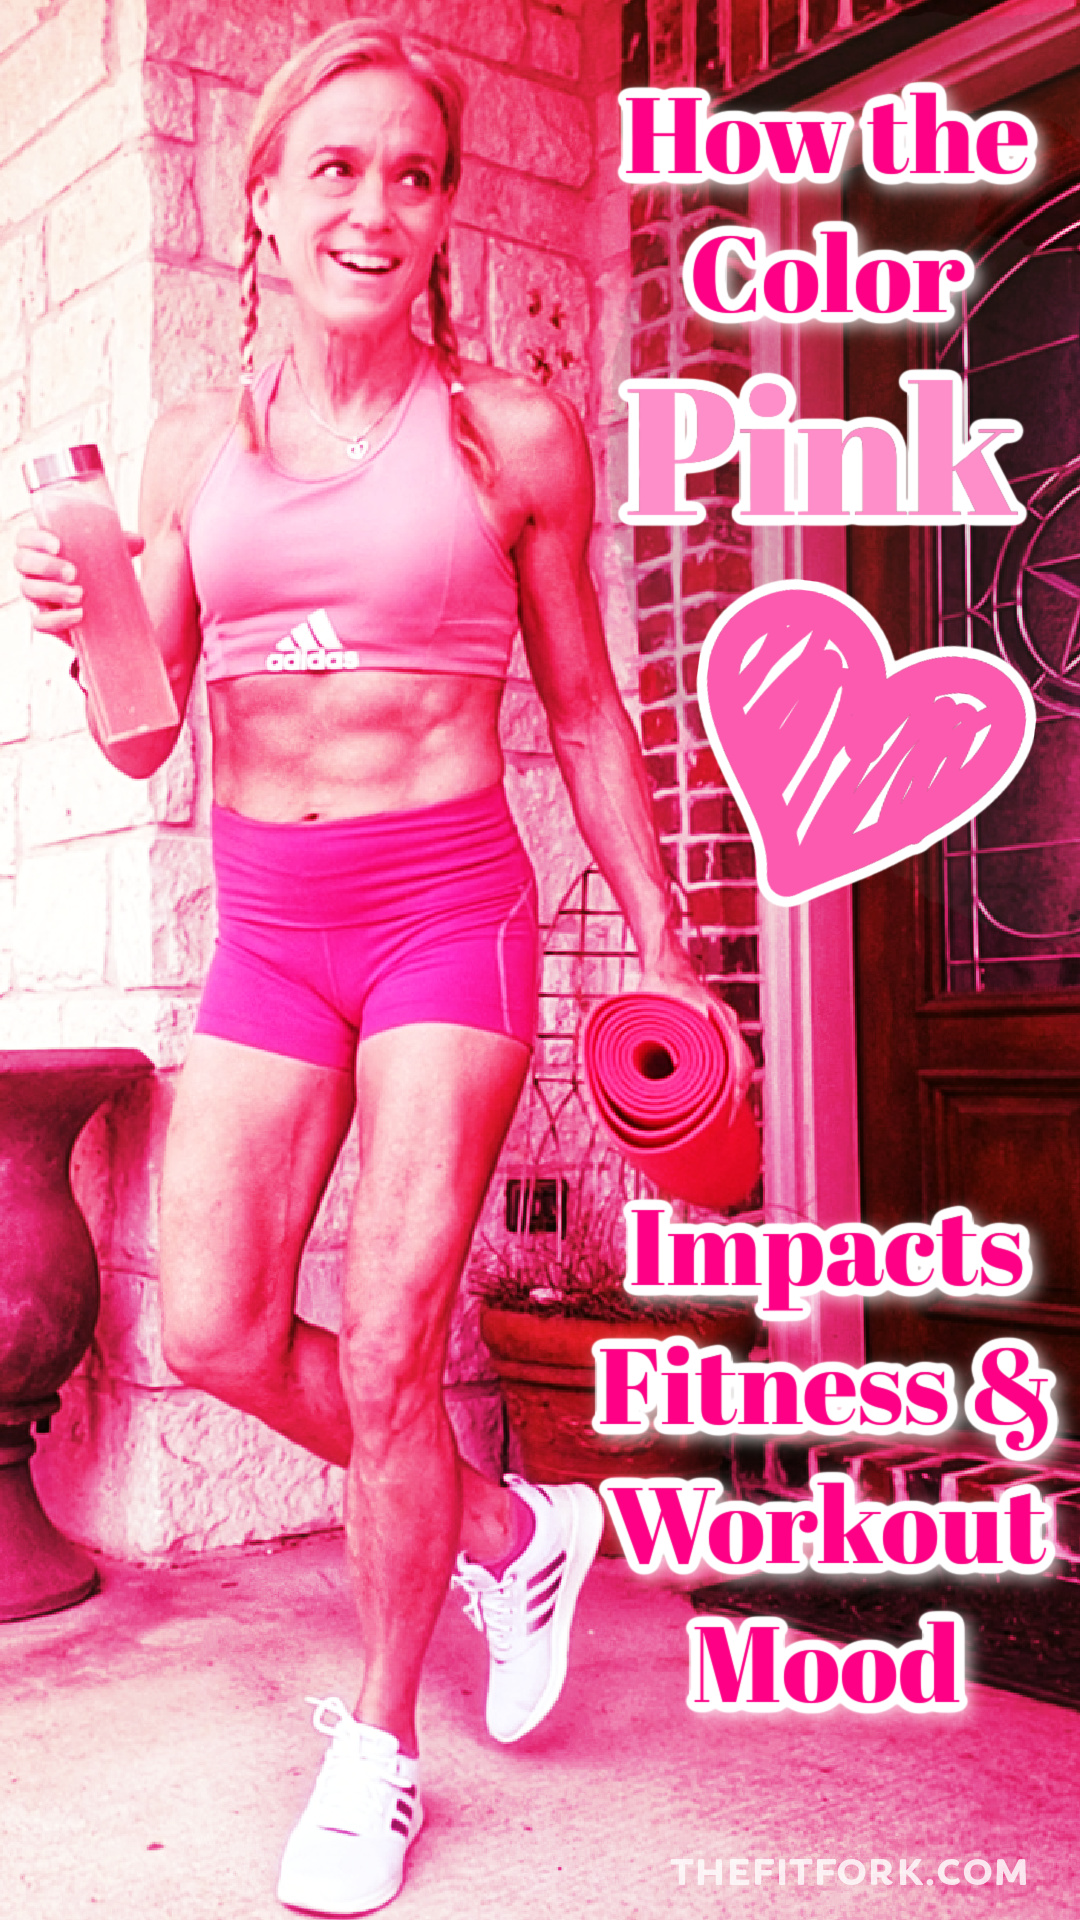 In the Pink: How Color Pink Impacts Fitness & Workout Mood